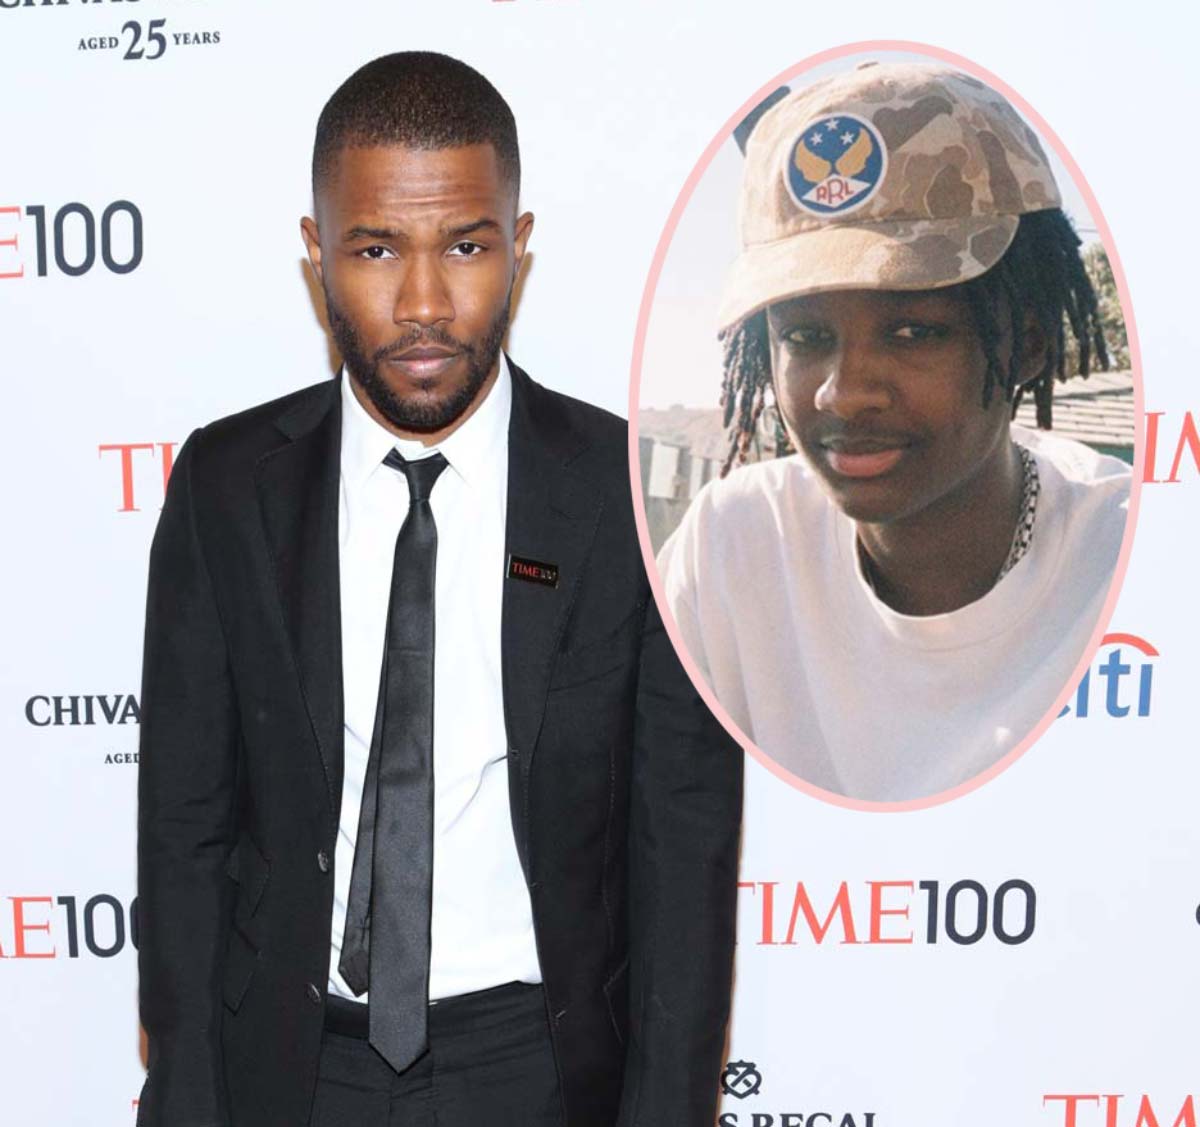 Frank Oceans Brother Ryan Breaux Reportedly Dead At 18 Following Car